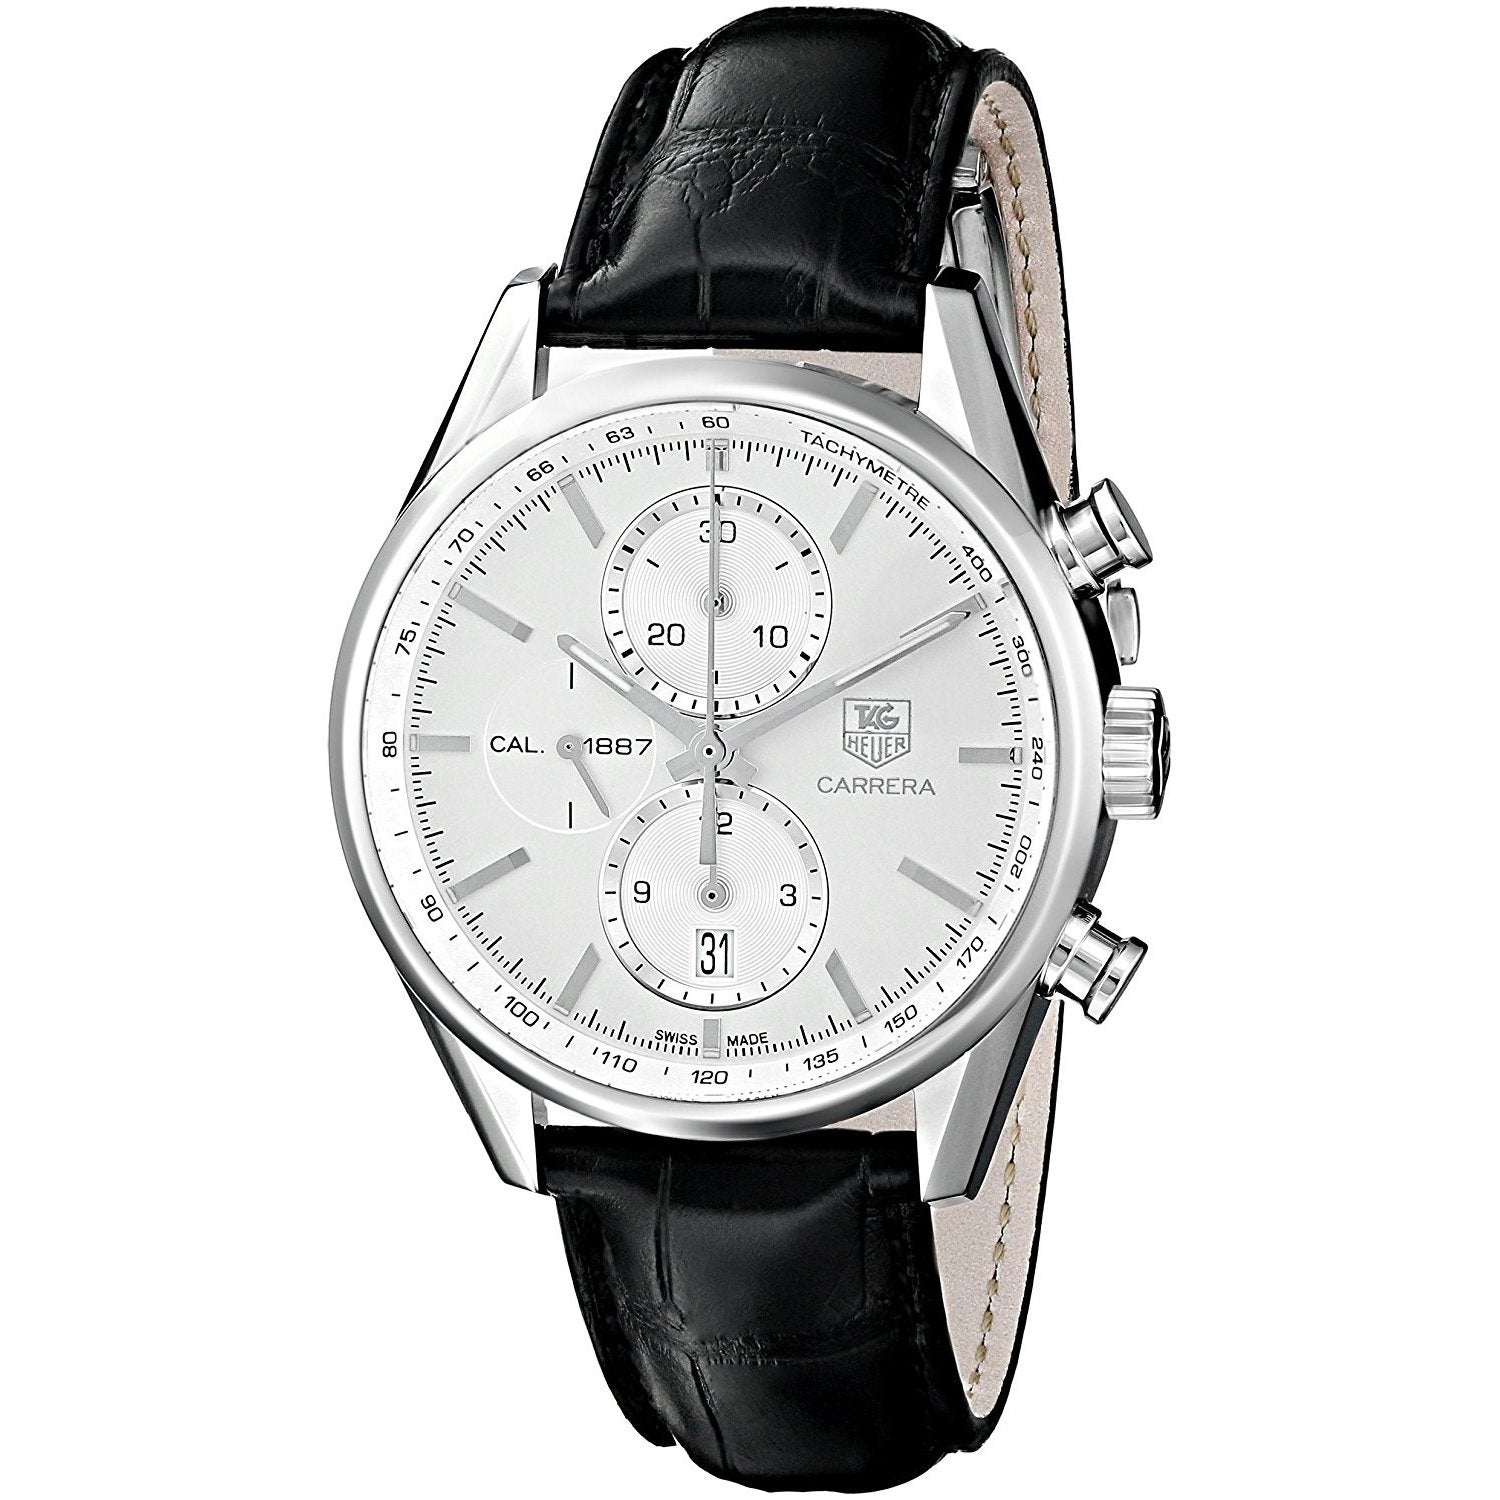 Tag Heuer Men's Carrera Chronograph Automatic Watch